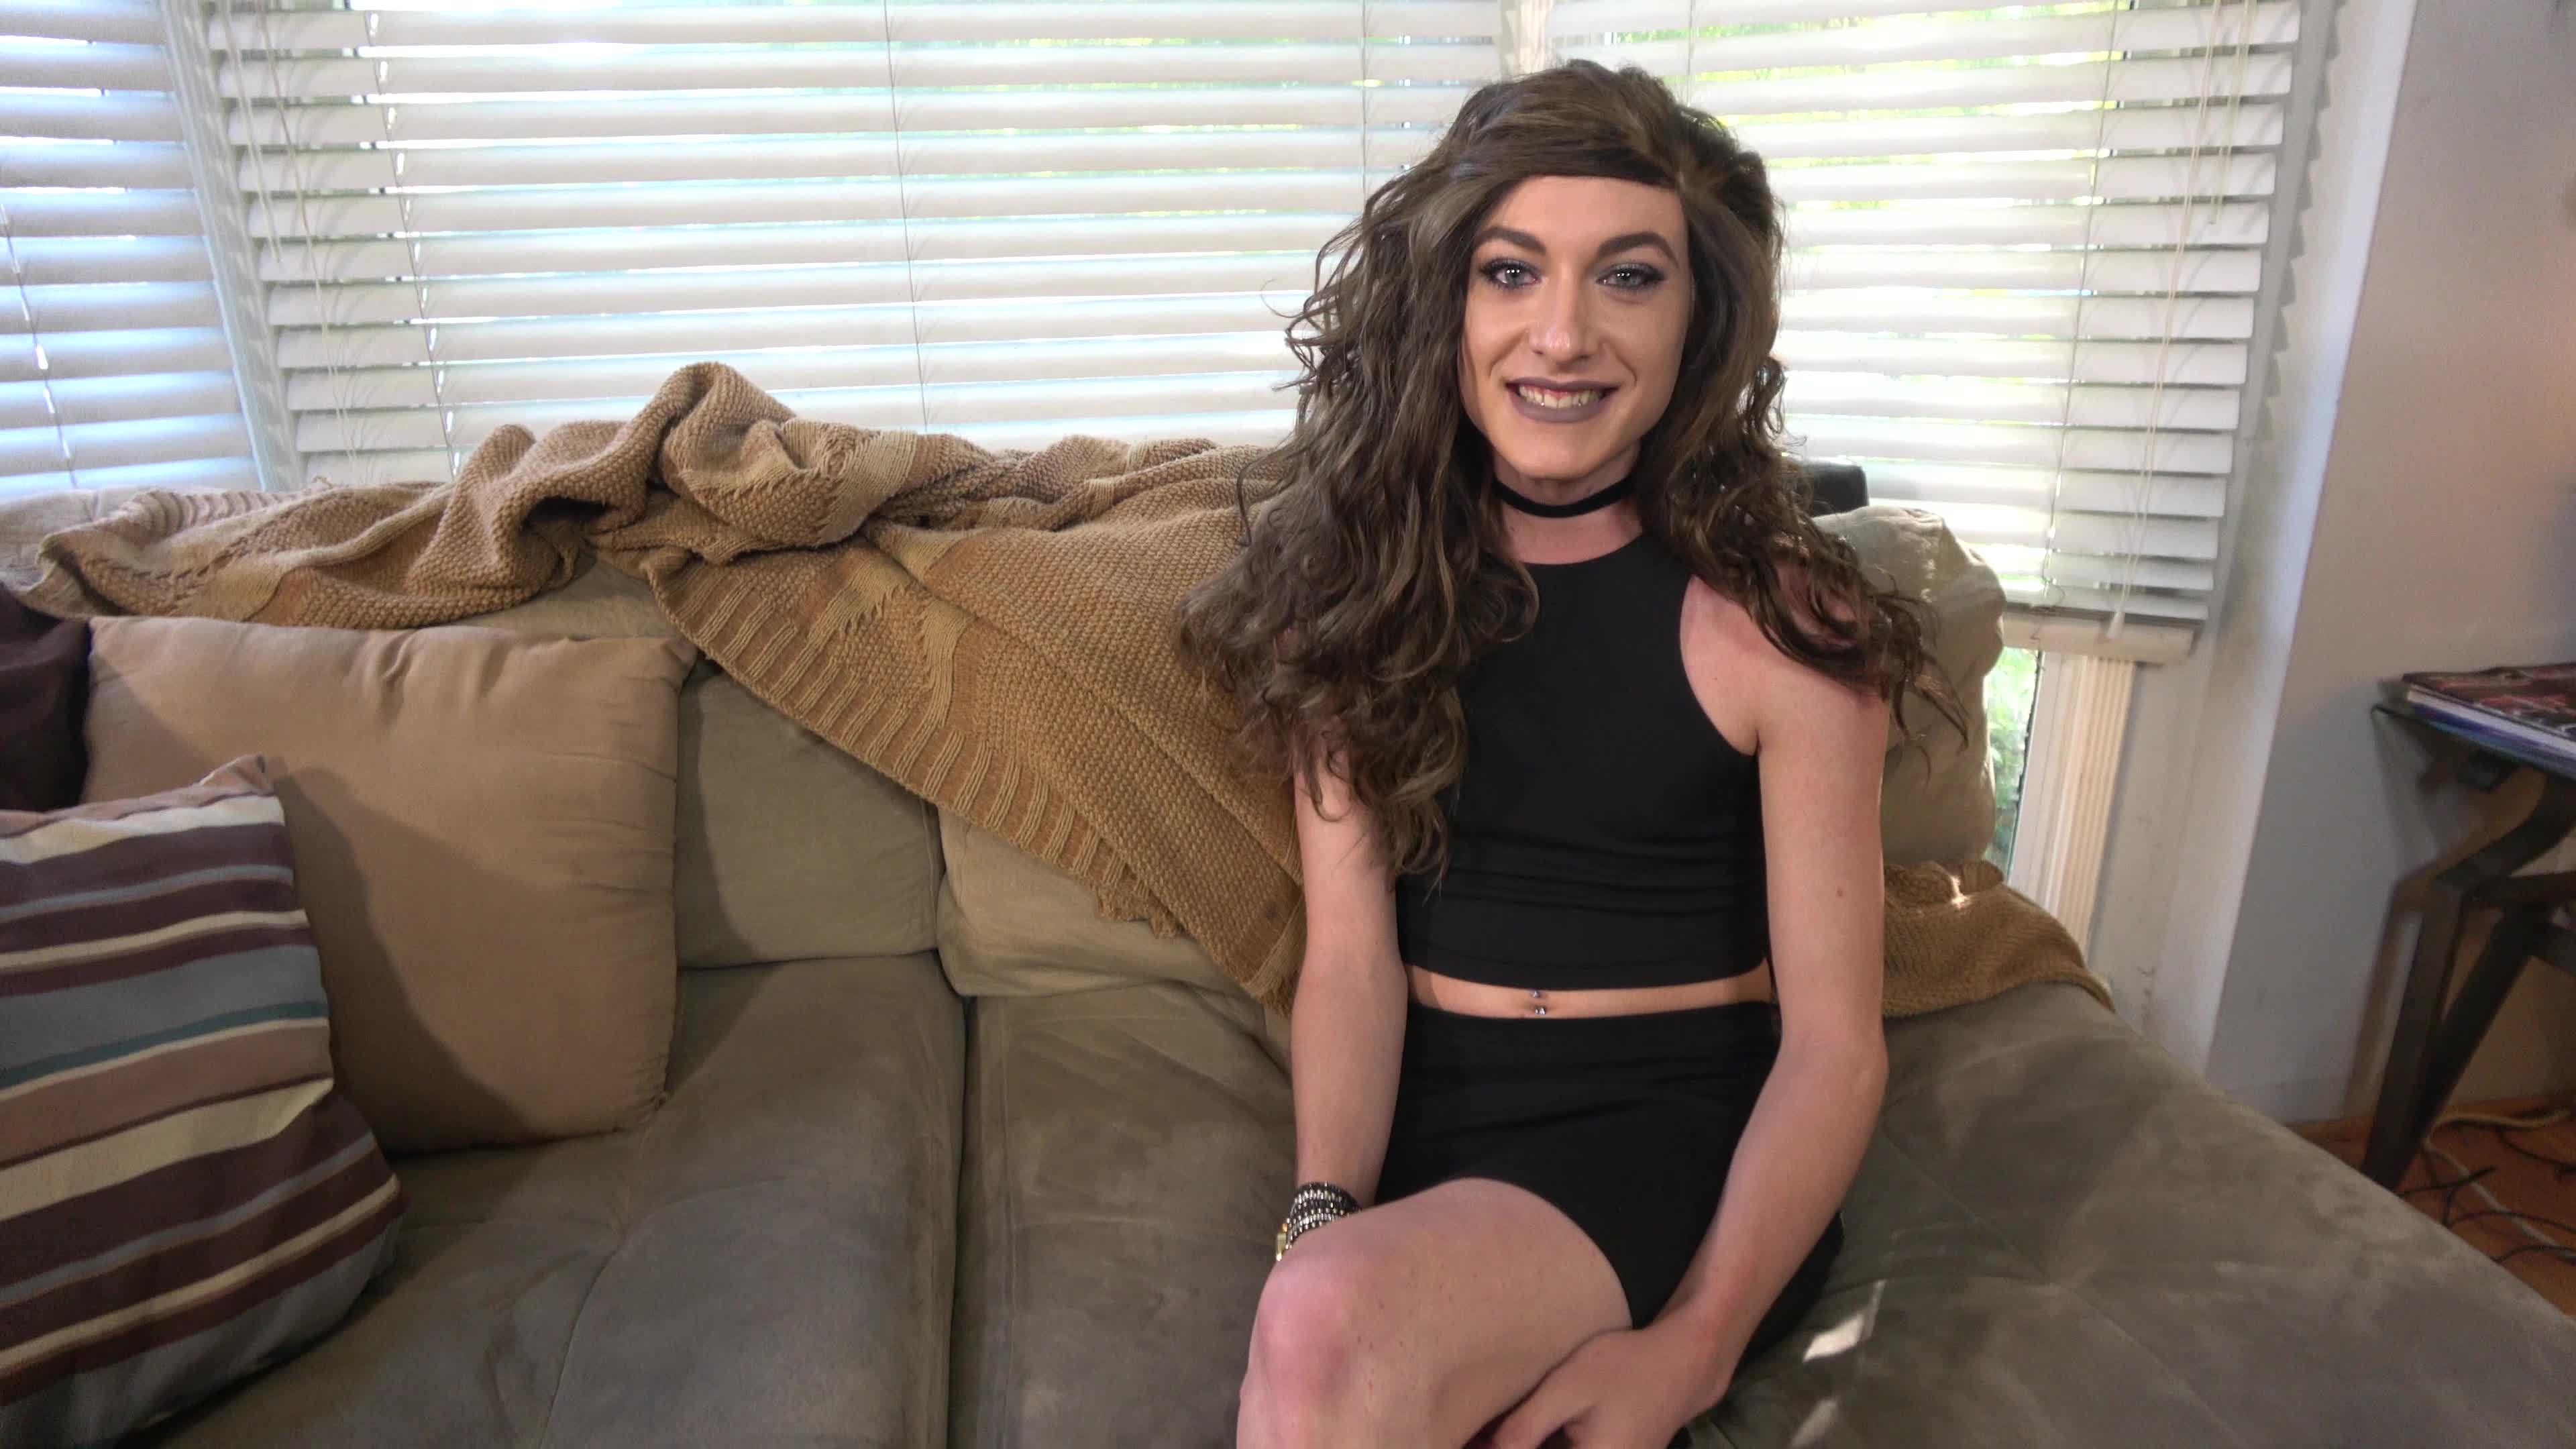 Hd simone casting couch Horny 18